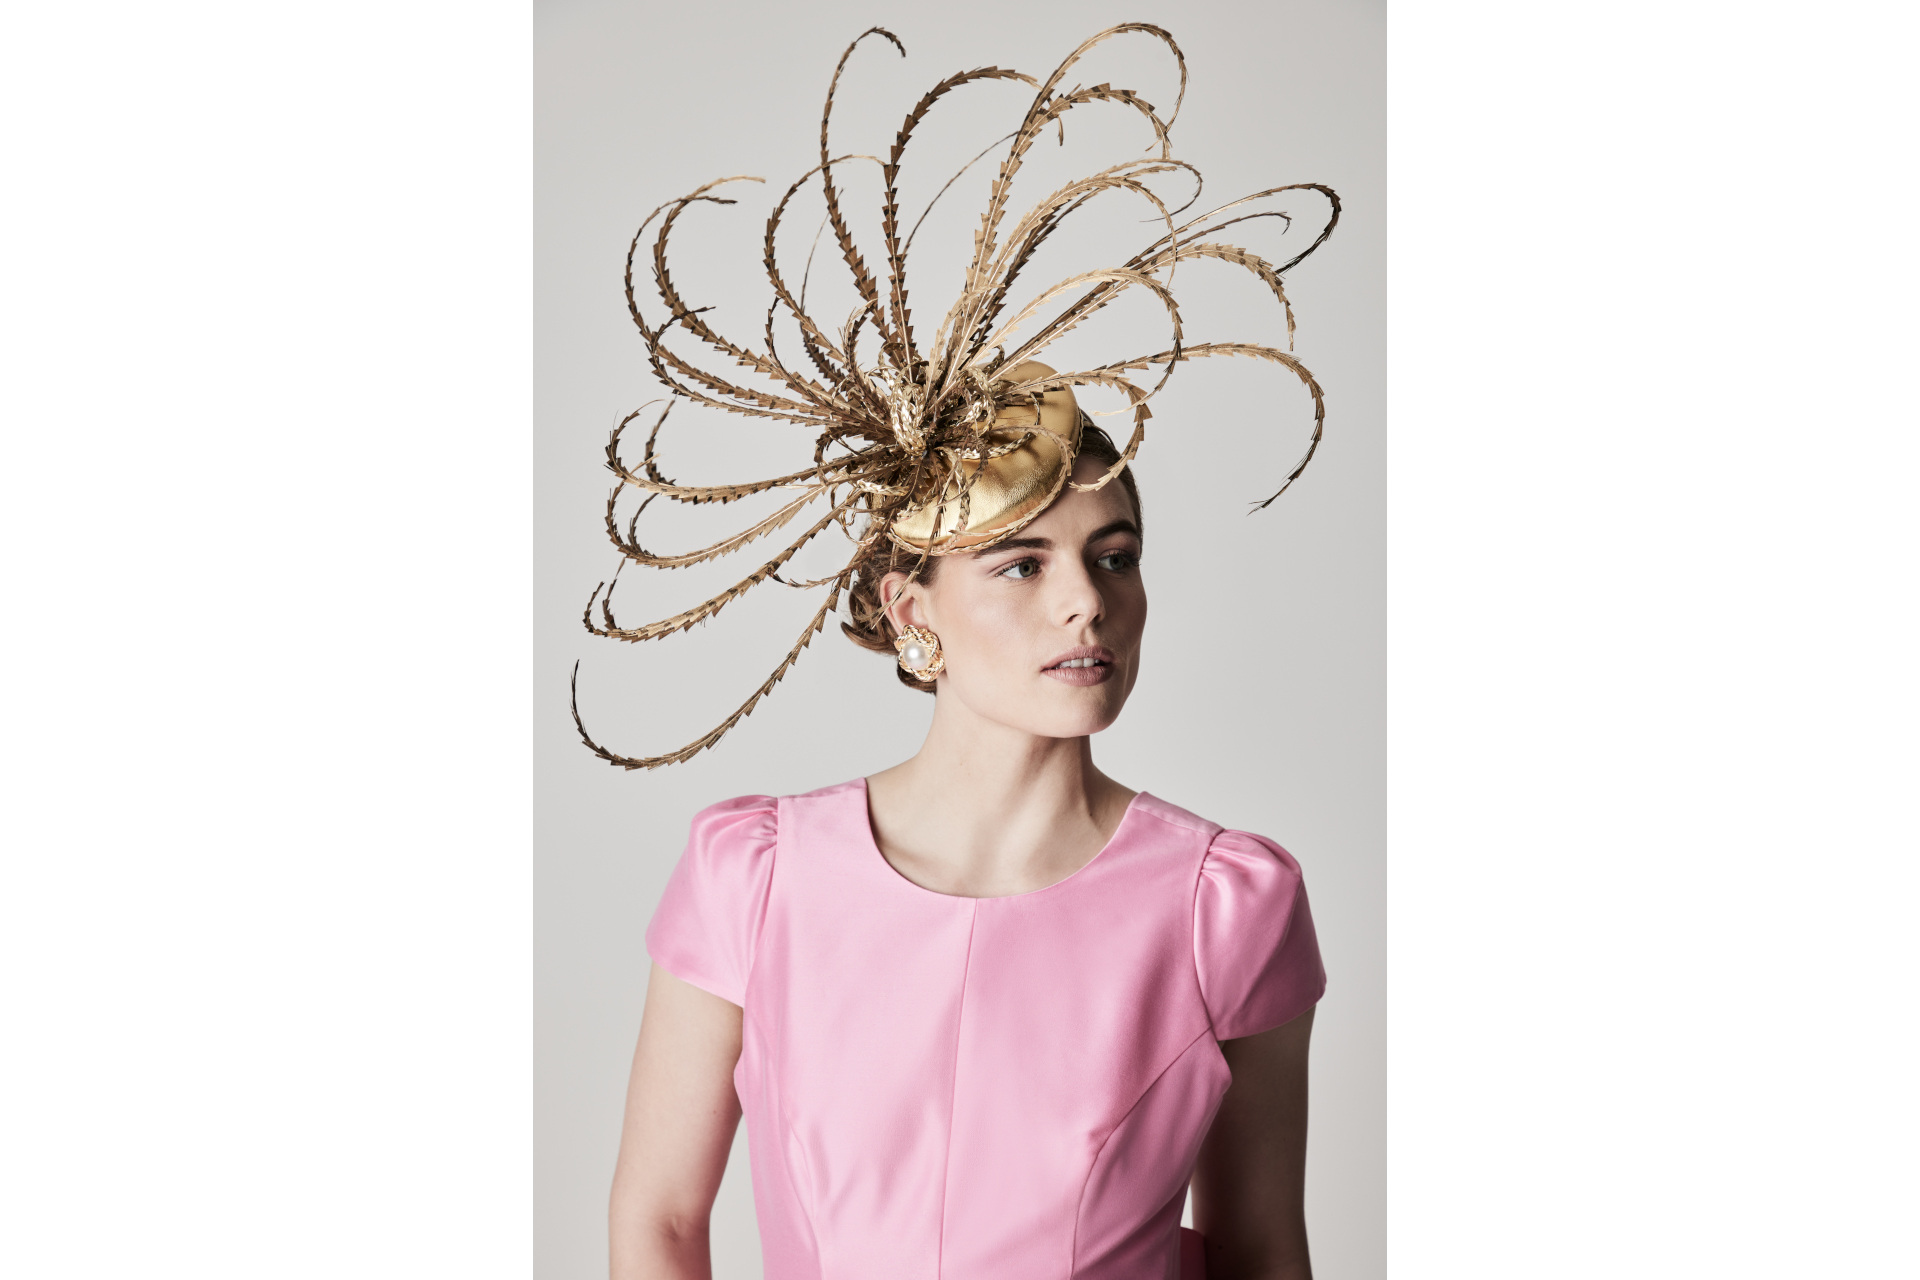 Woman in gold headpiece and pink top